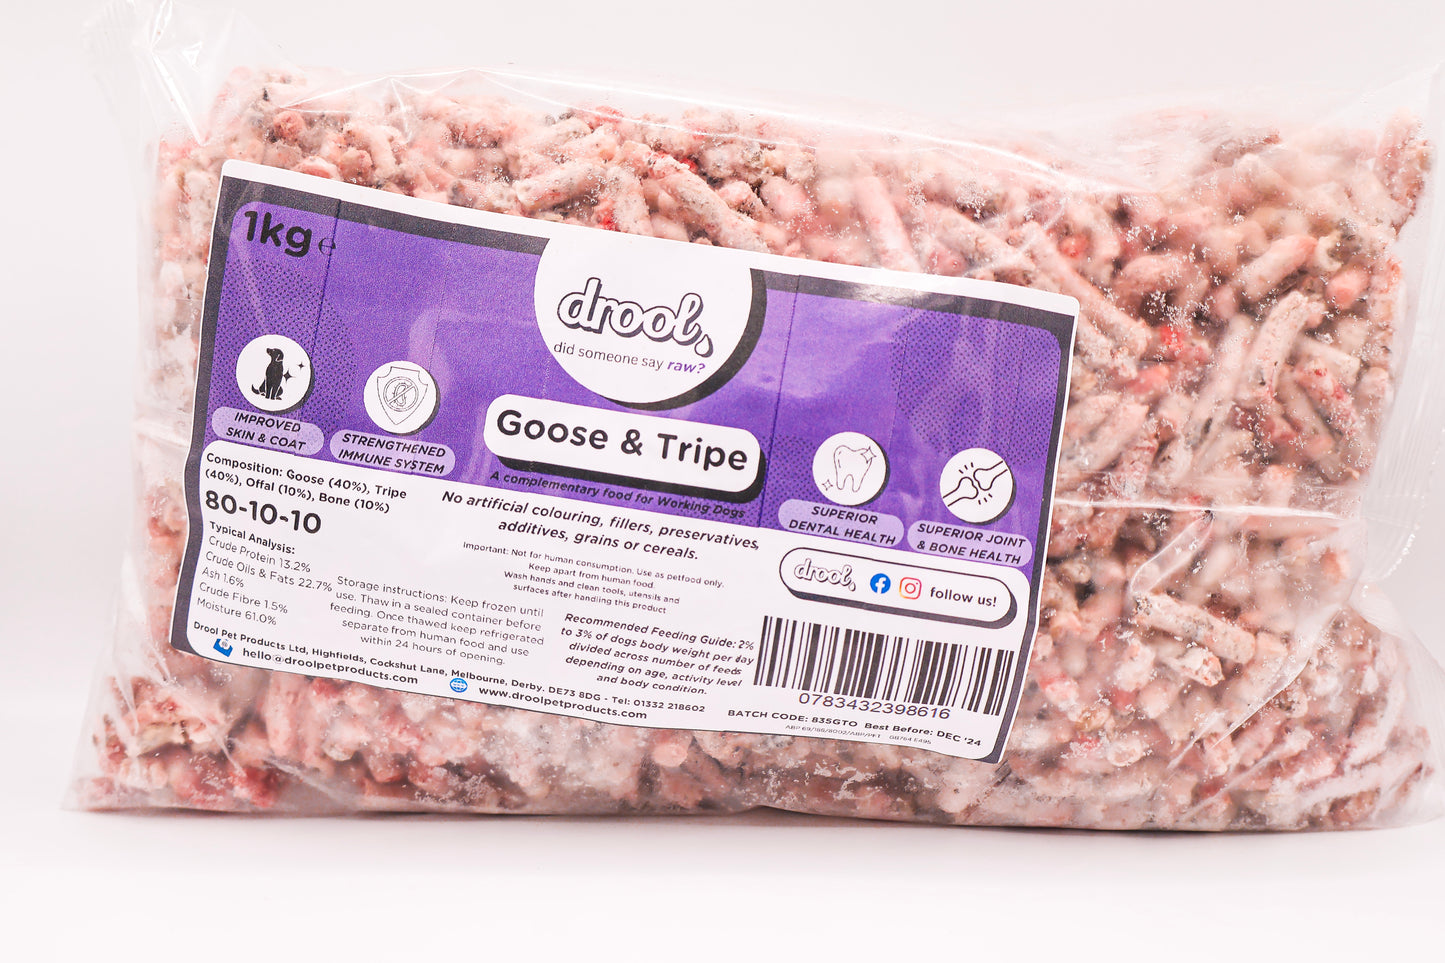 Drool Freeflow Goose and Tripe Mince 1kg